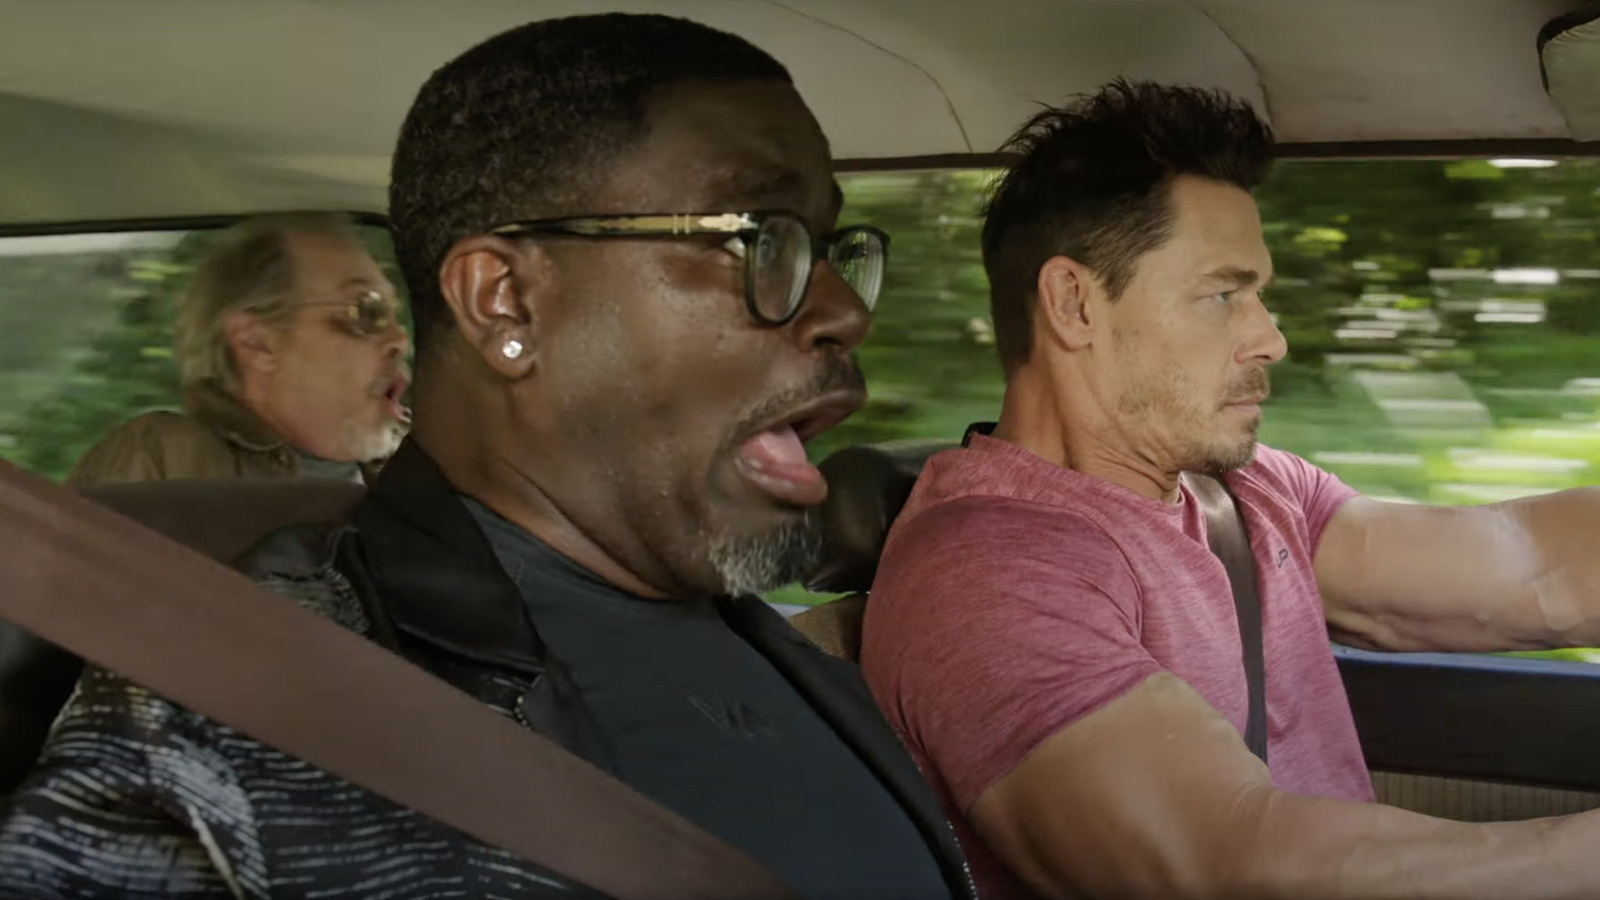 Vacation Friends 2' Review: Lil Rel Howery & John Cena in Hulu